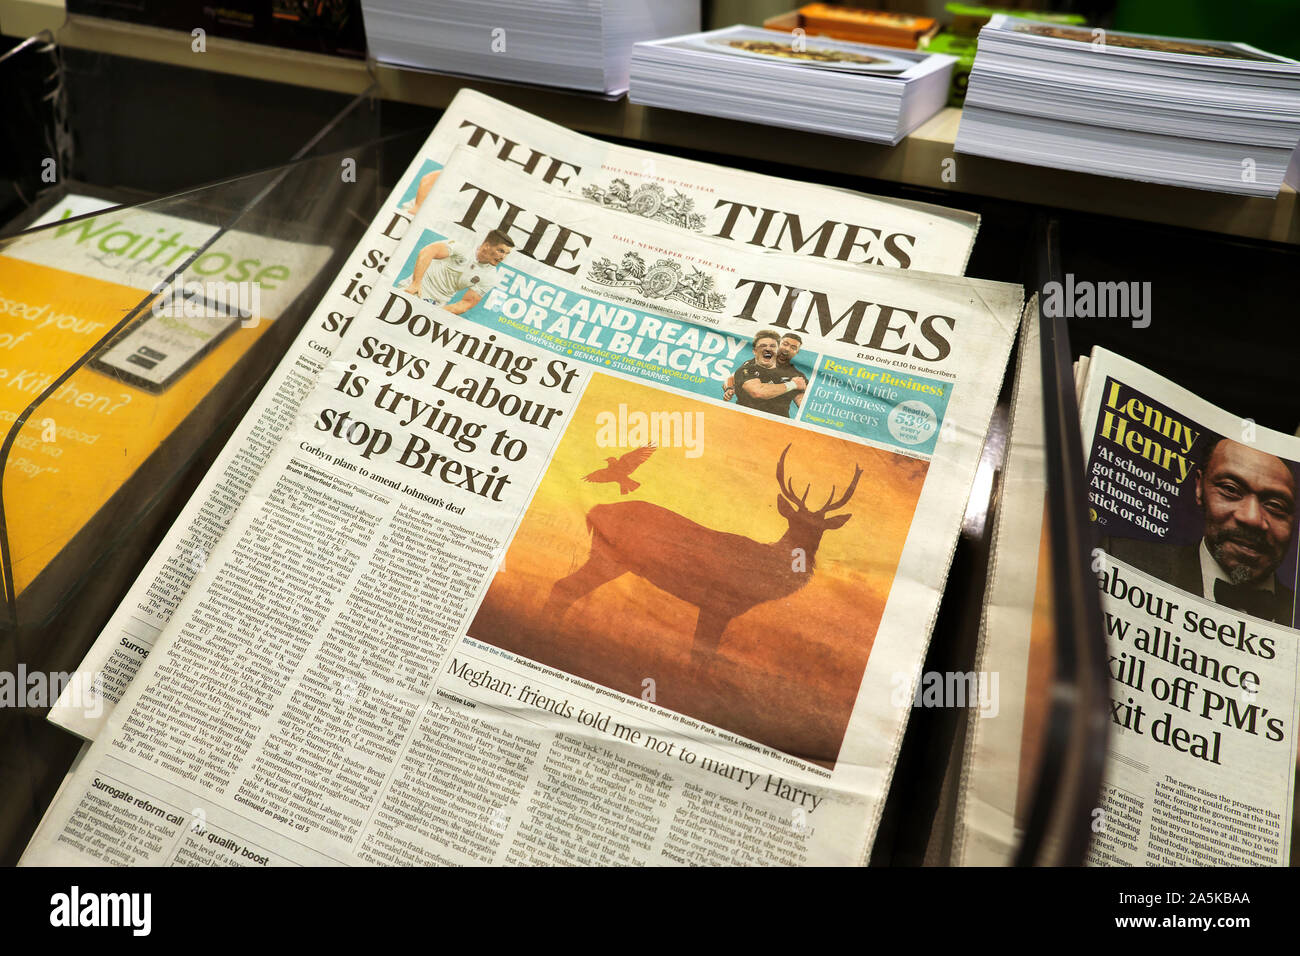 The Times newspaper front page 'Downing St says Labour is trying to stop Brexit' on 21 October 2019 on newsstand in London England UK Stock Photo